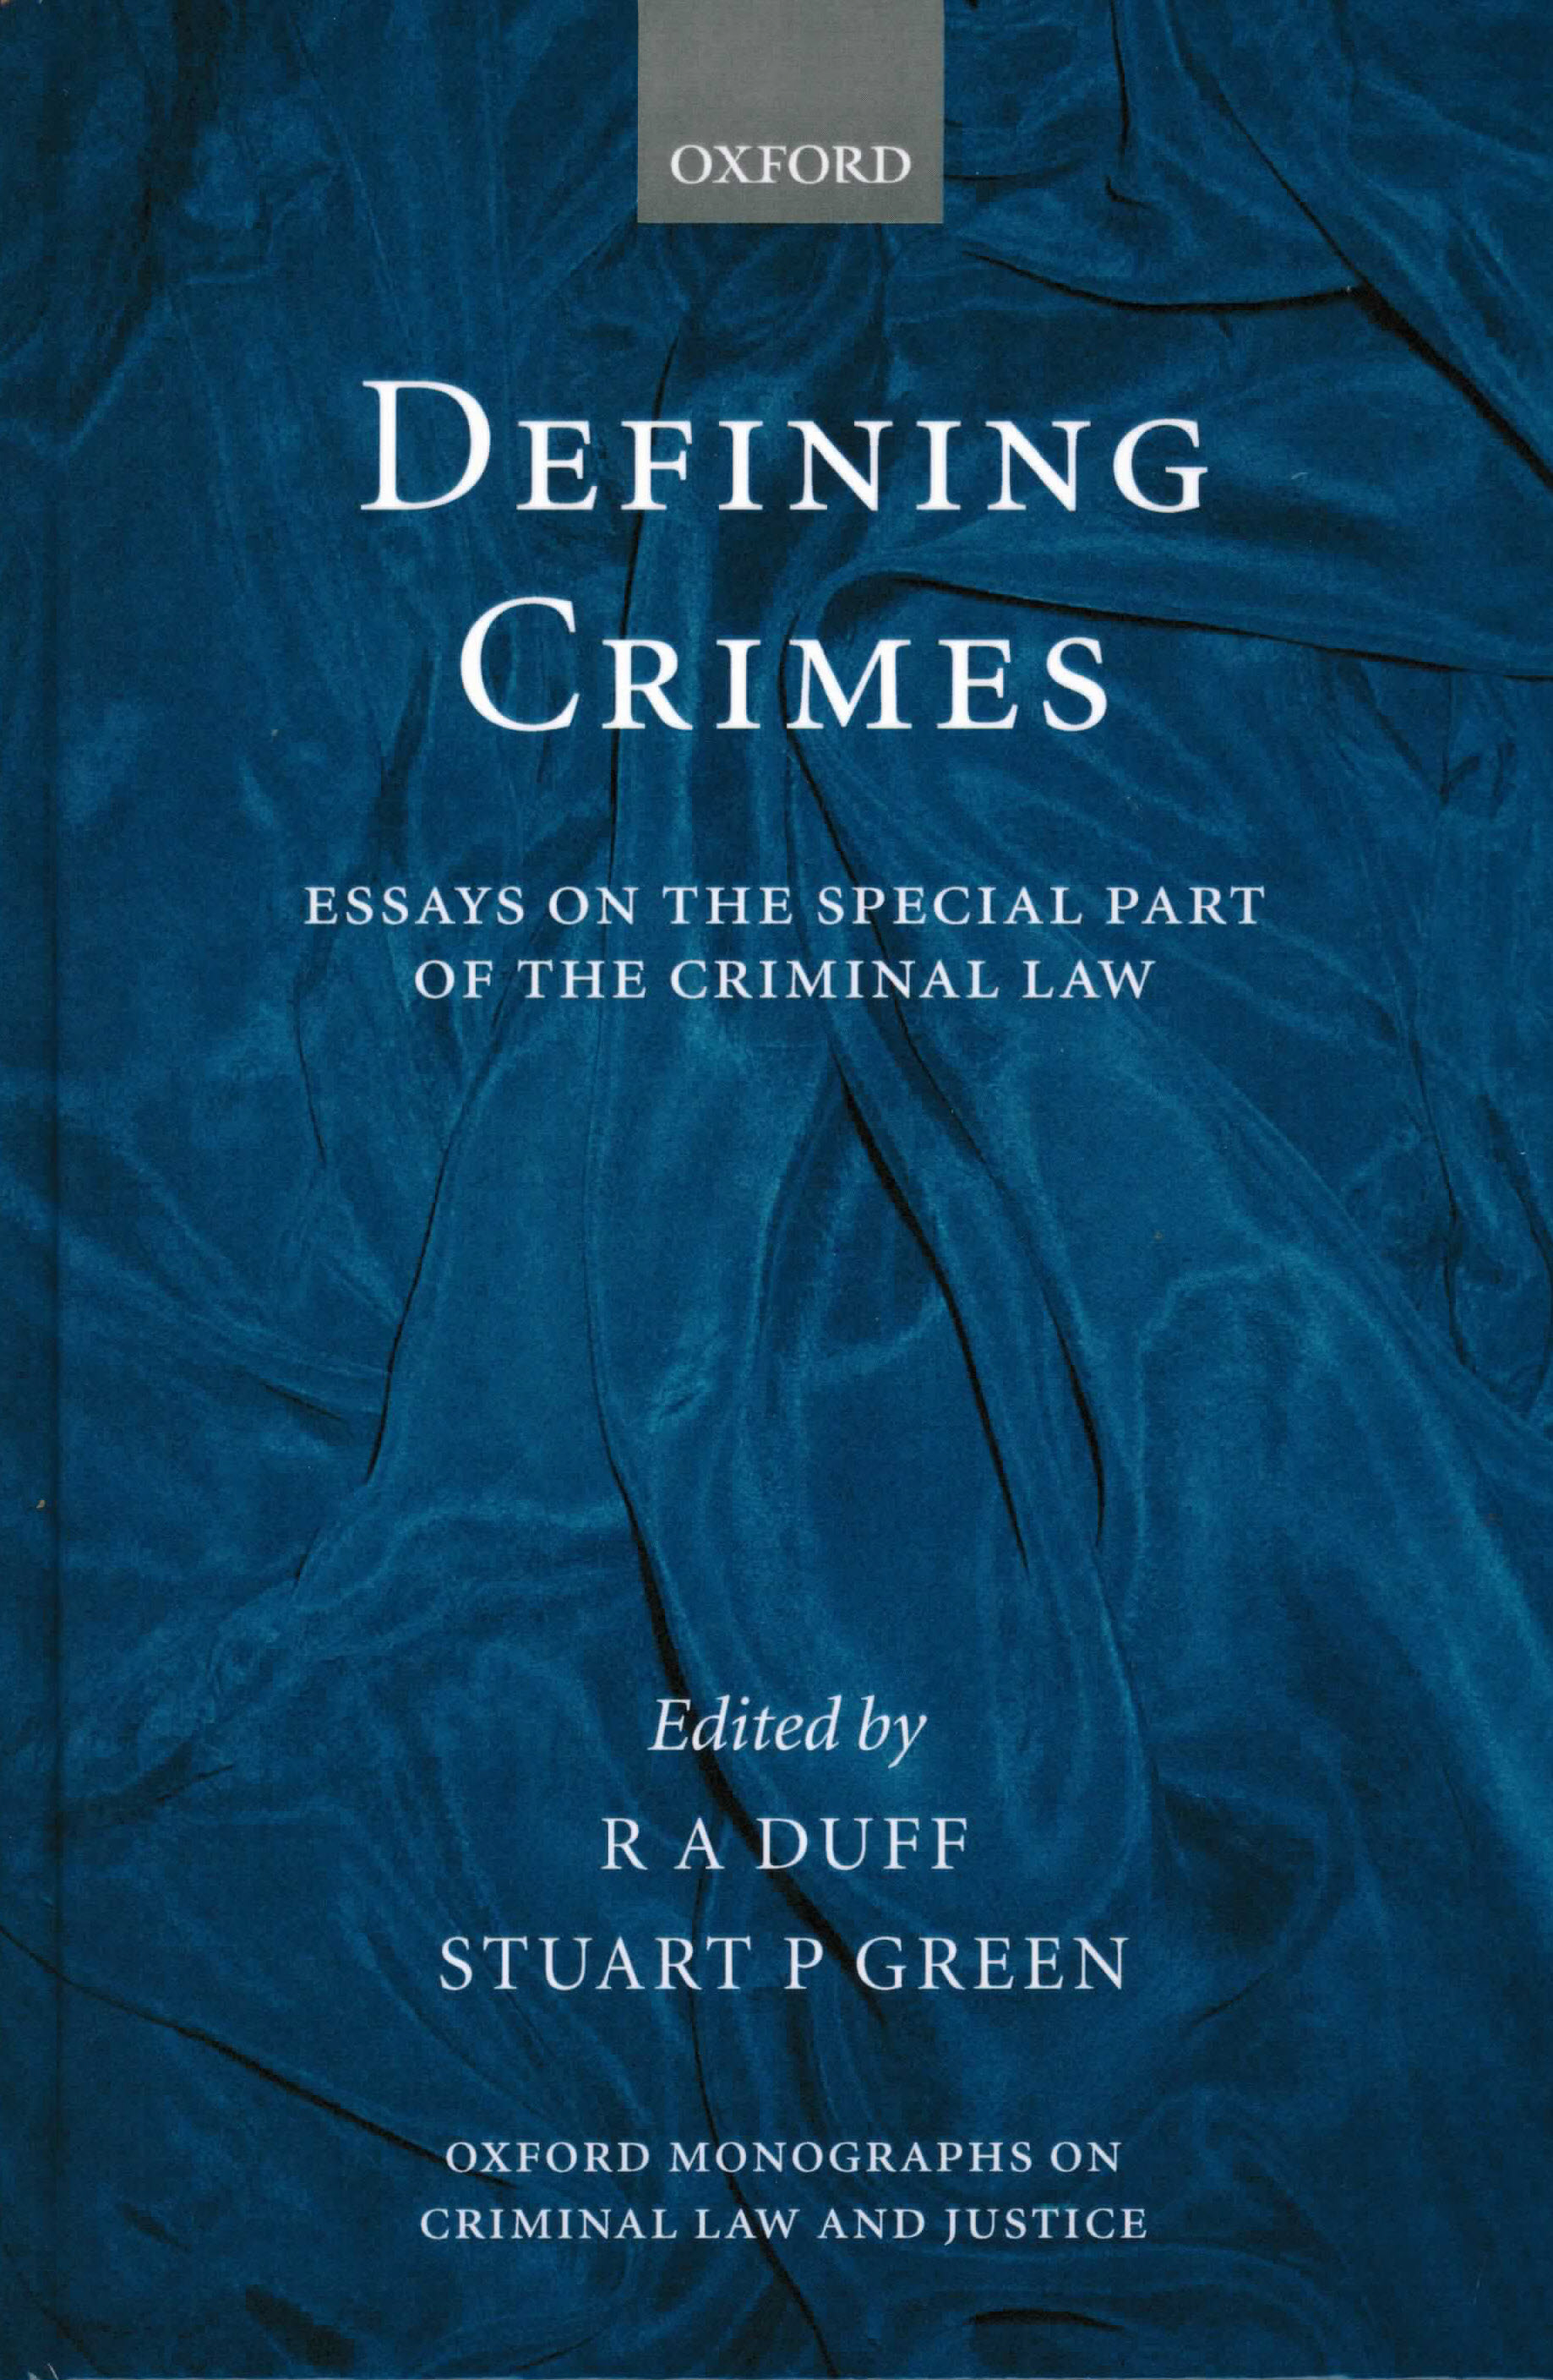 Defining crimes. essays on the especial part of the criminal law